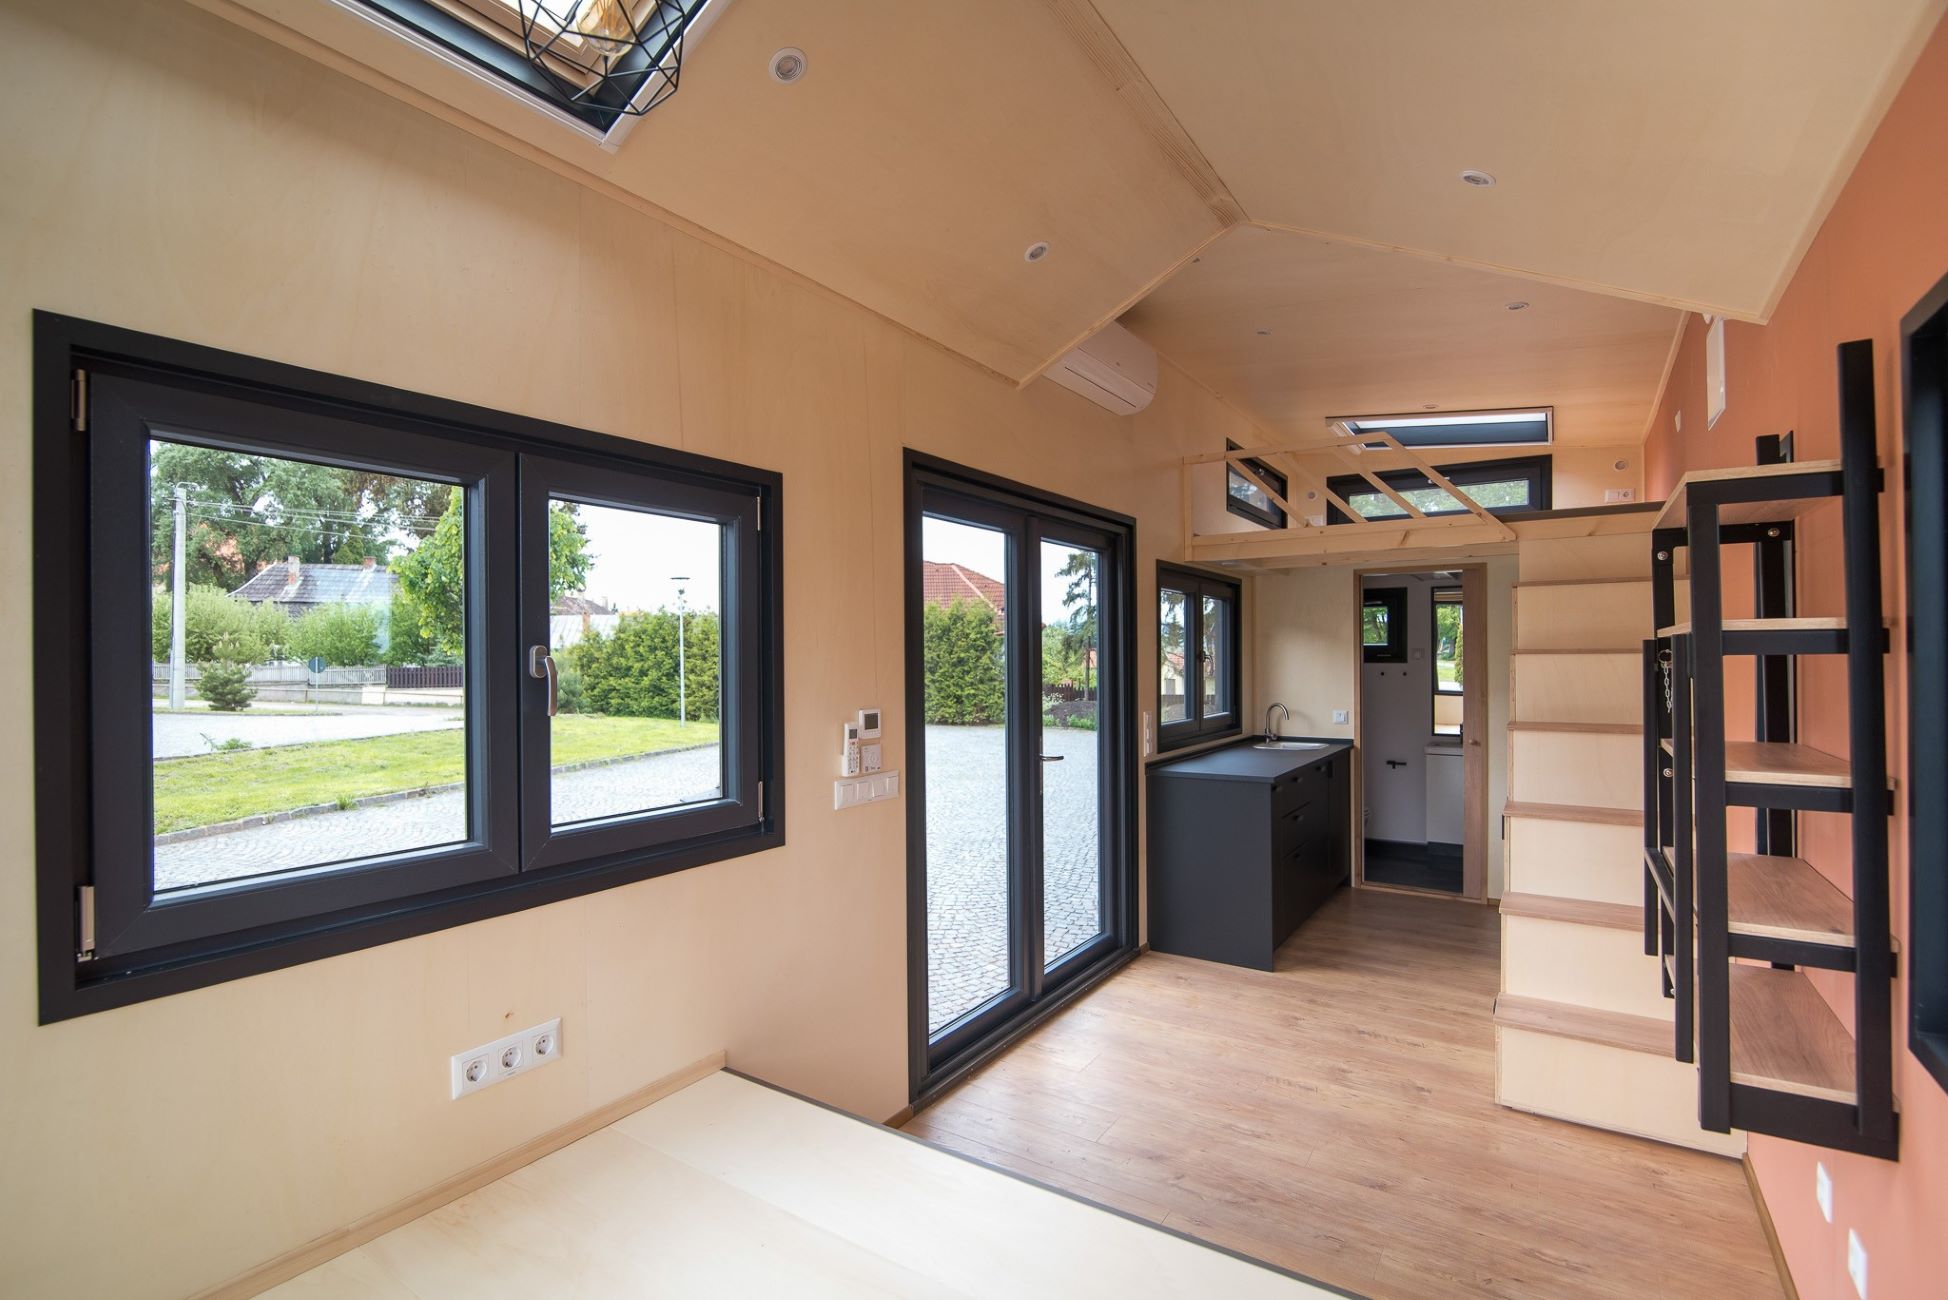 How Does A Tiny House Fit Into Sustainable Design